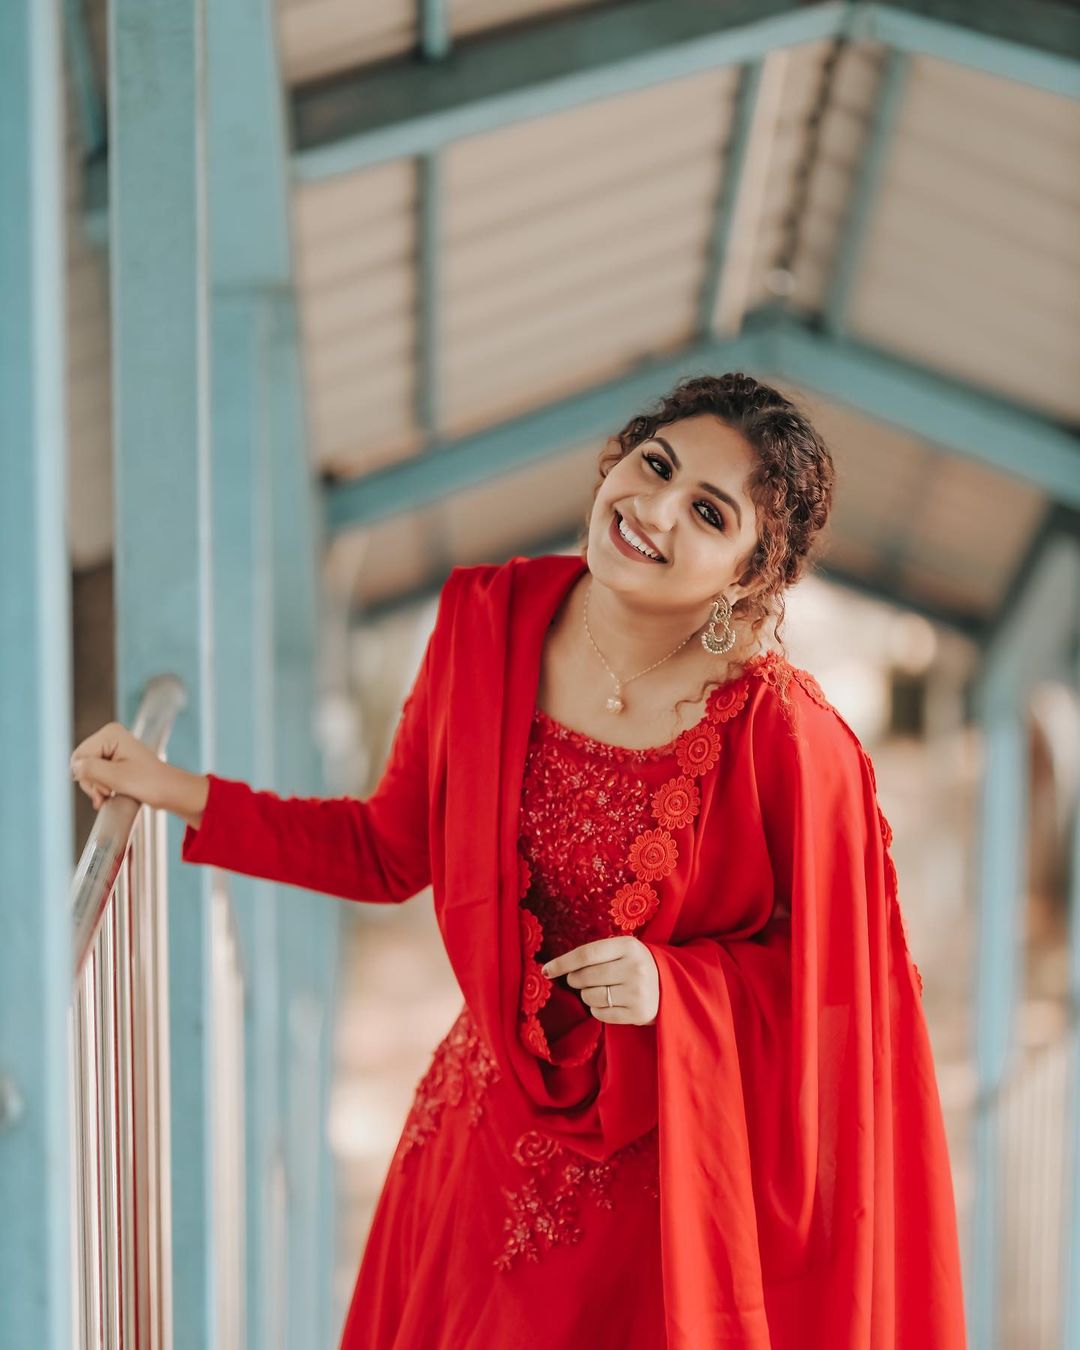 Noorin Shereef Sxe Hd Video - Noorin Shereef (Actress) Biography, Wiki, Age, Height, Career, Family,  Awards and Many More